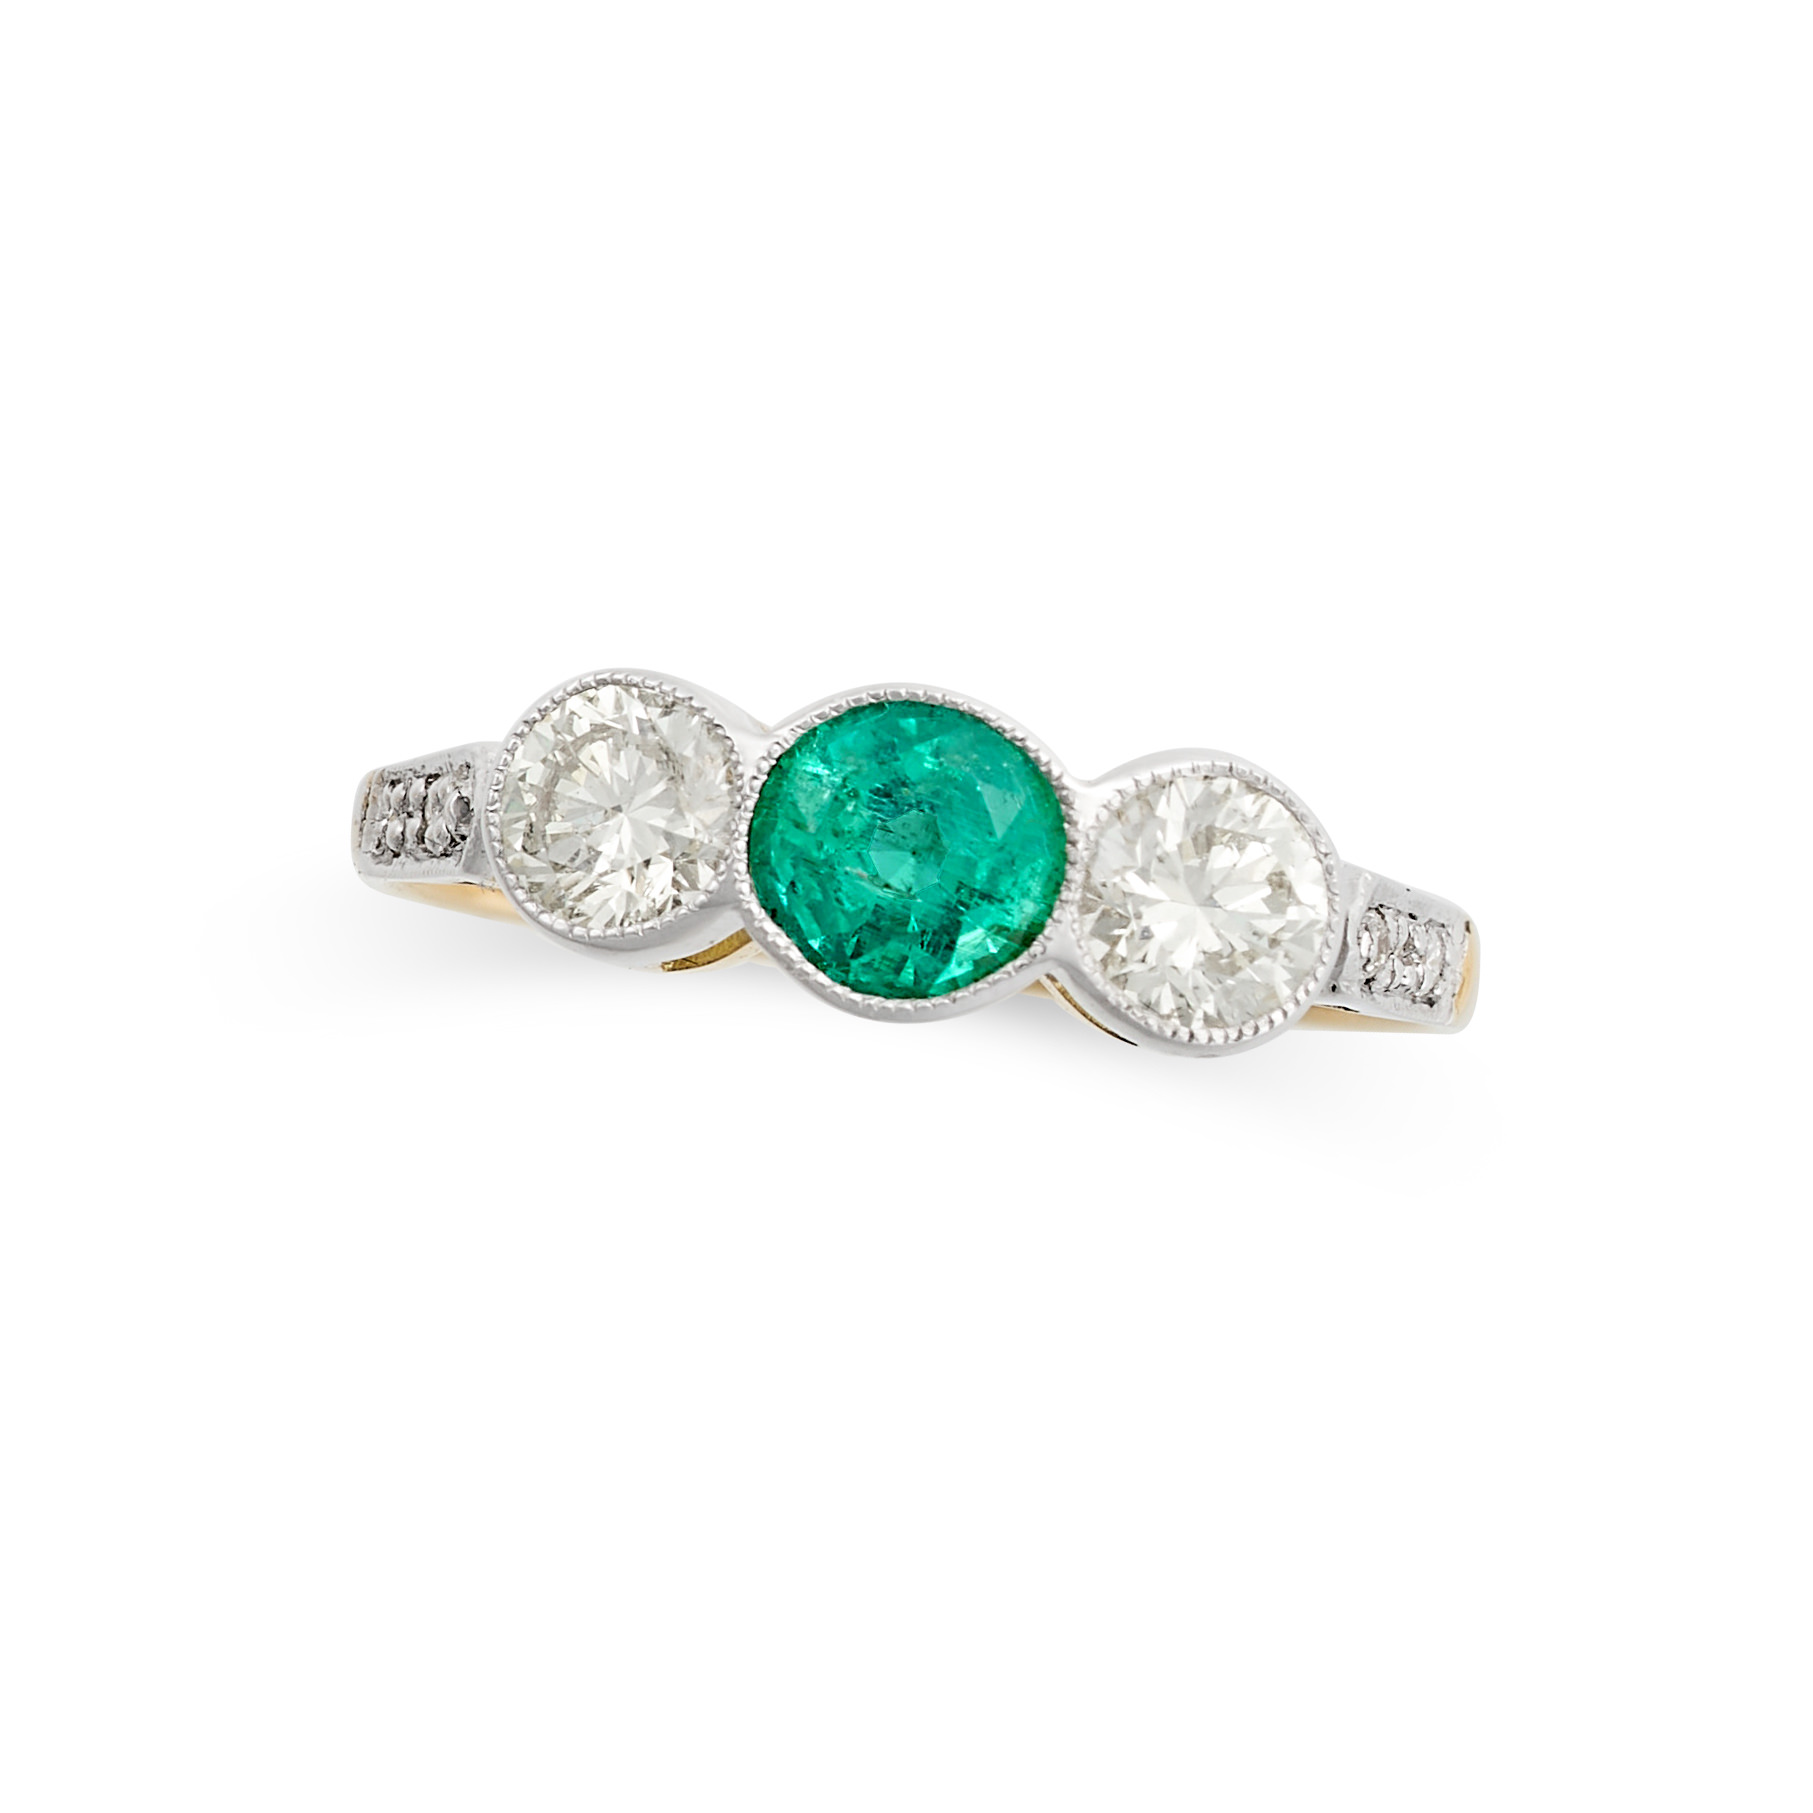 A VINTAGE EMERALD AND DIAMOND THREE STONE RING in 18ct yellow and white gold, set with a round cu...